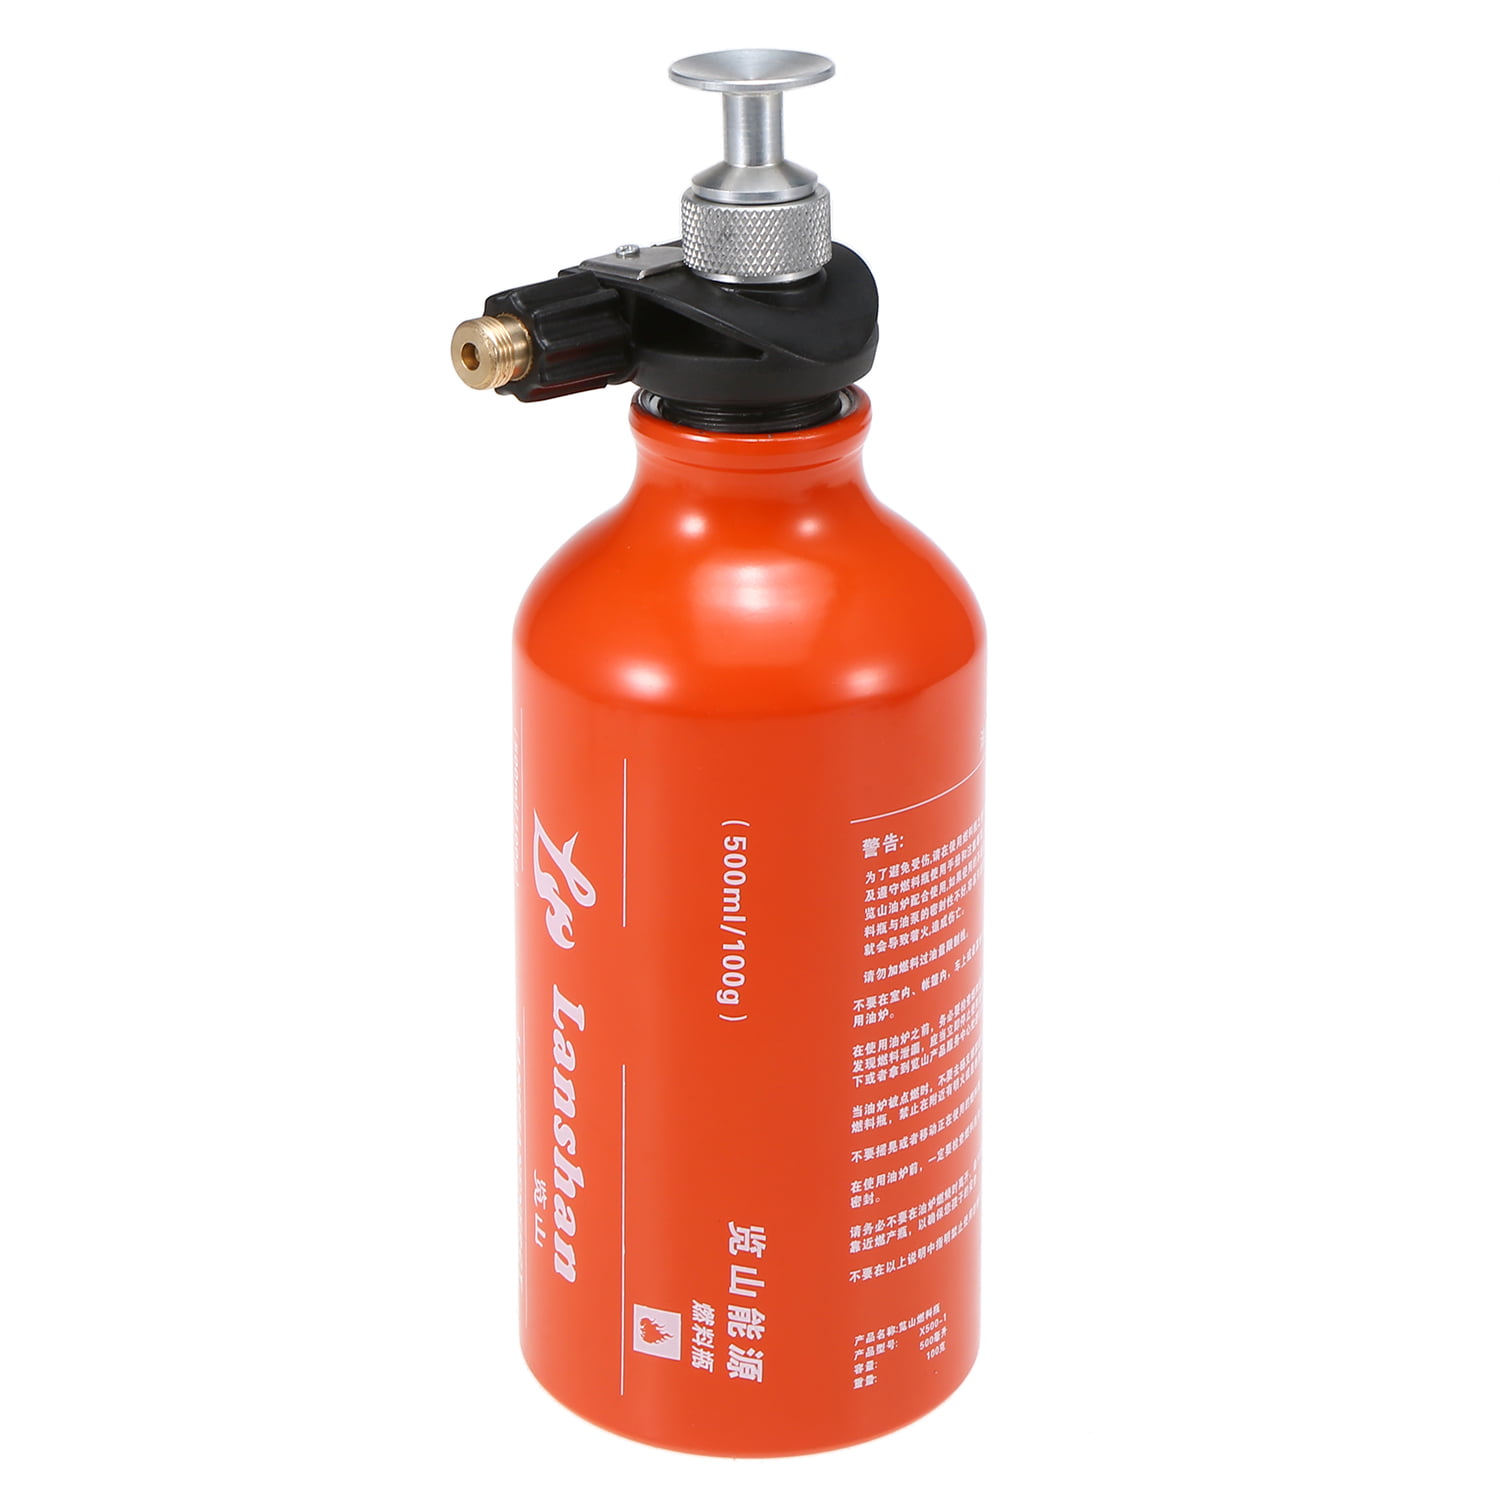 Camping Multi Fuel Oil Stove with 500ml Gasoline Fuel Bottle for Diesel Alc E9P0 